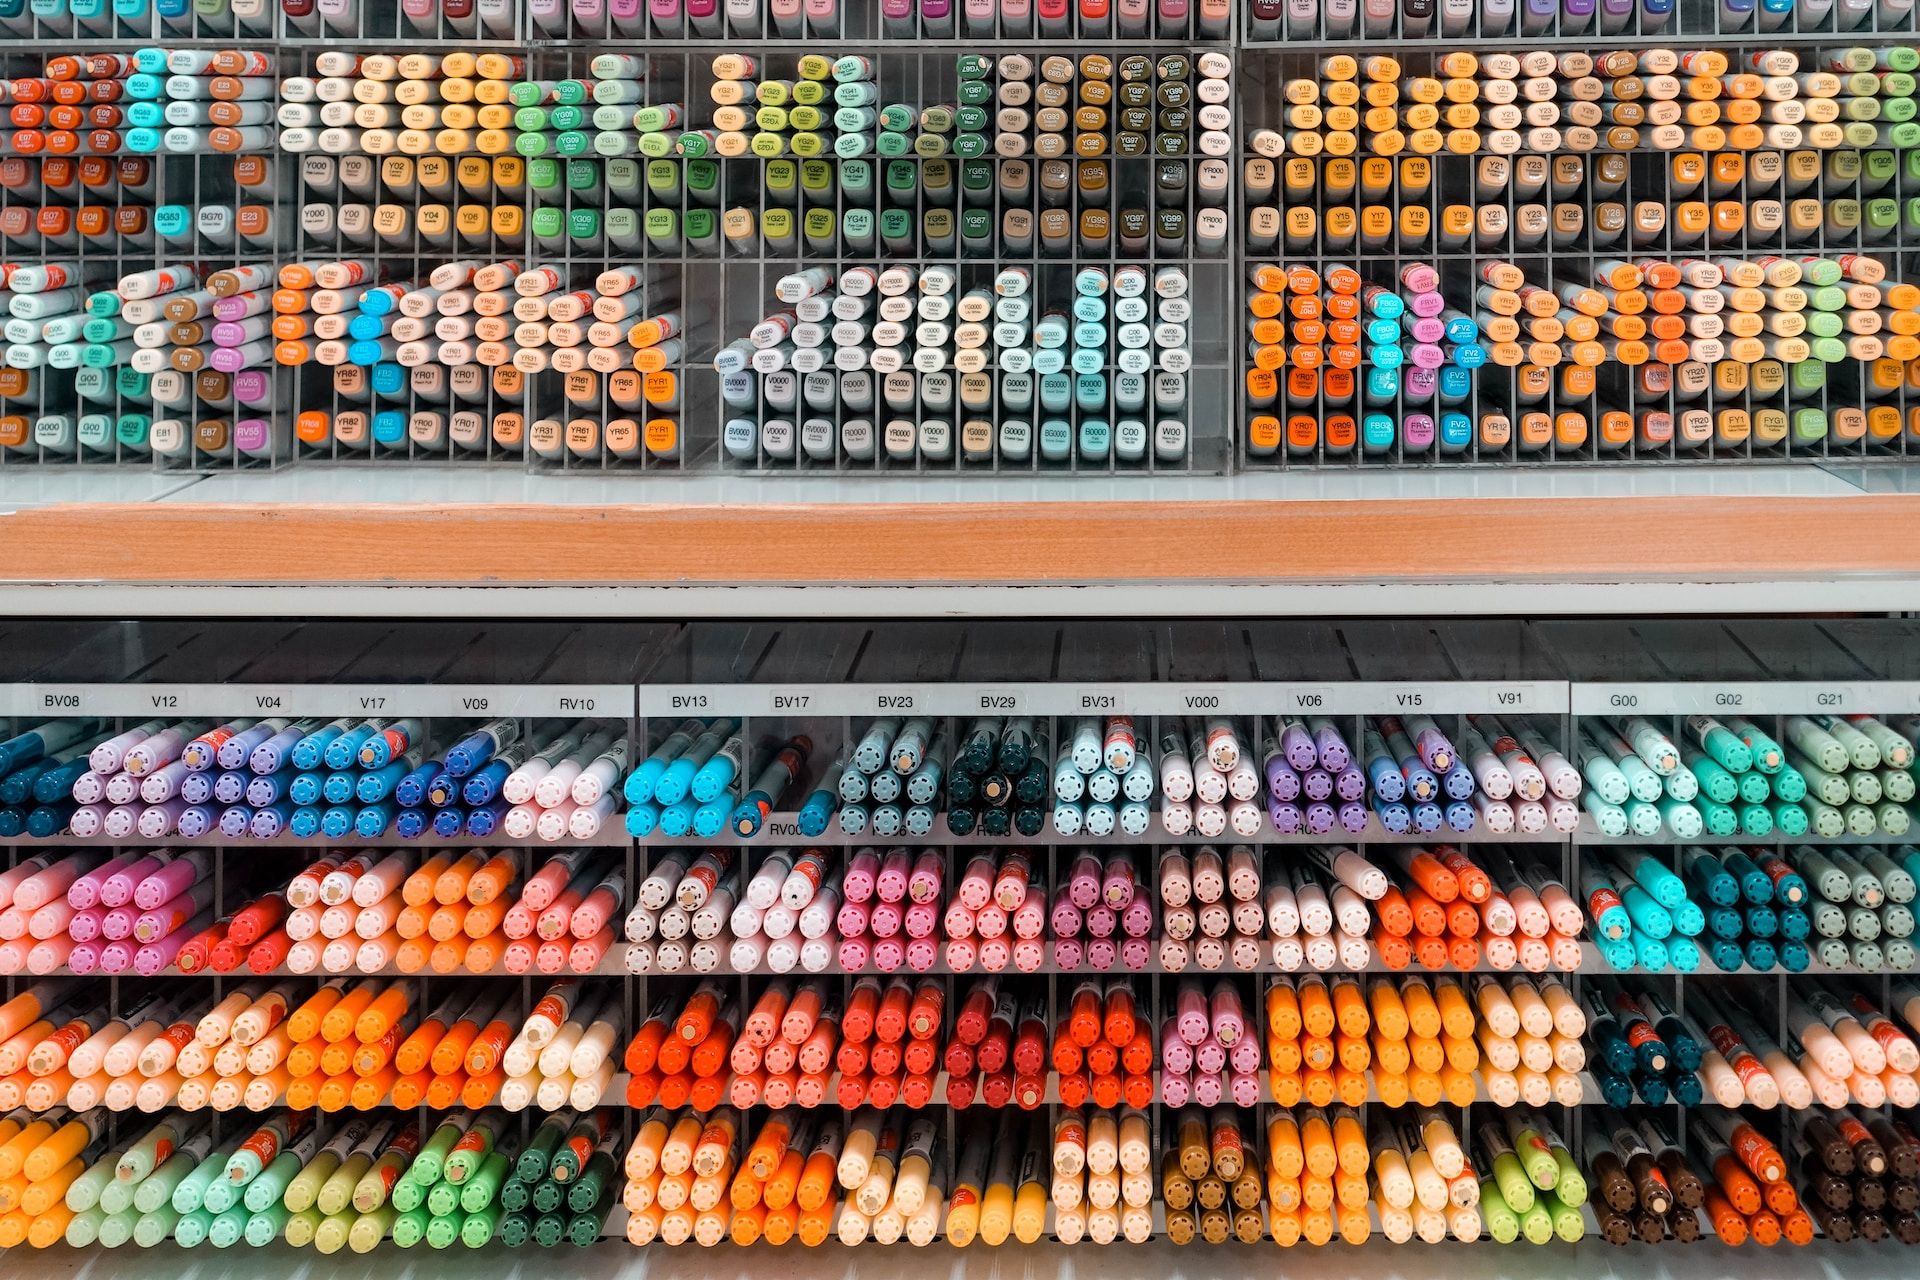 Rows of markers in Japan